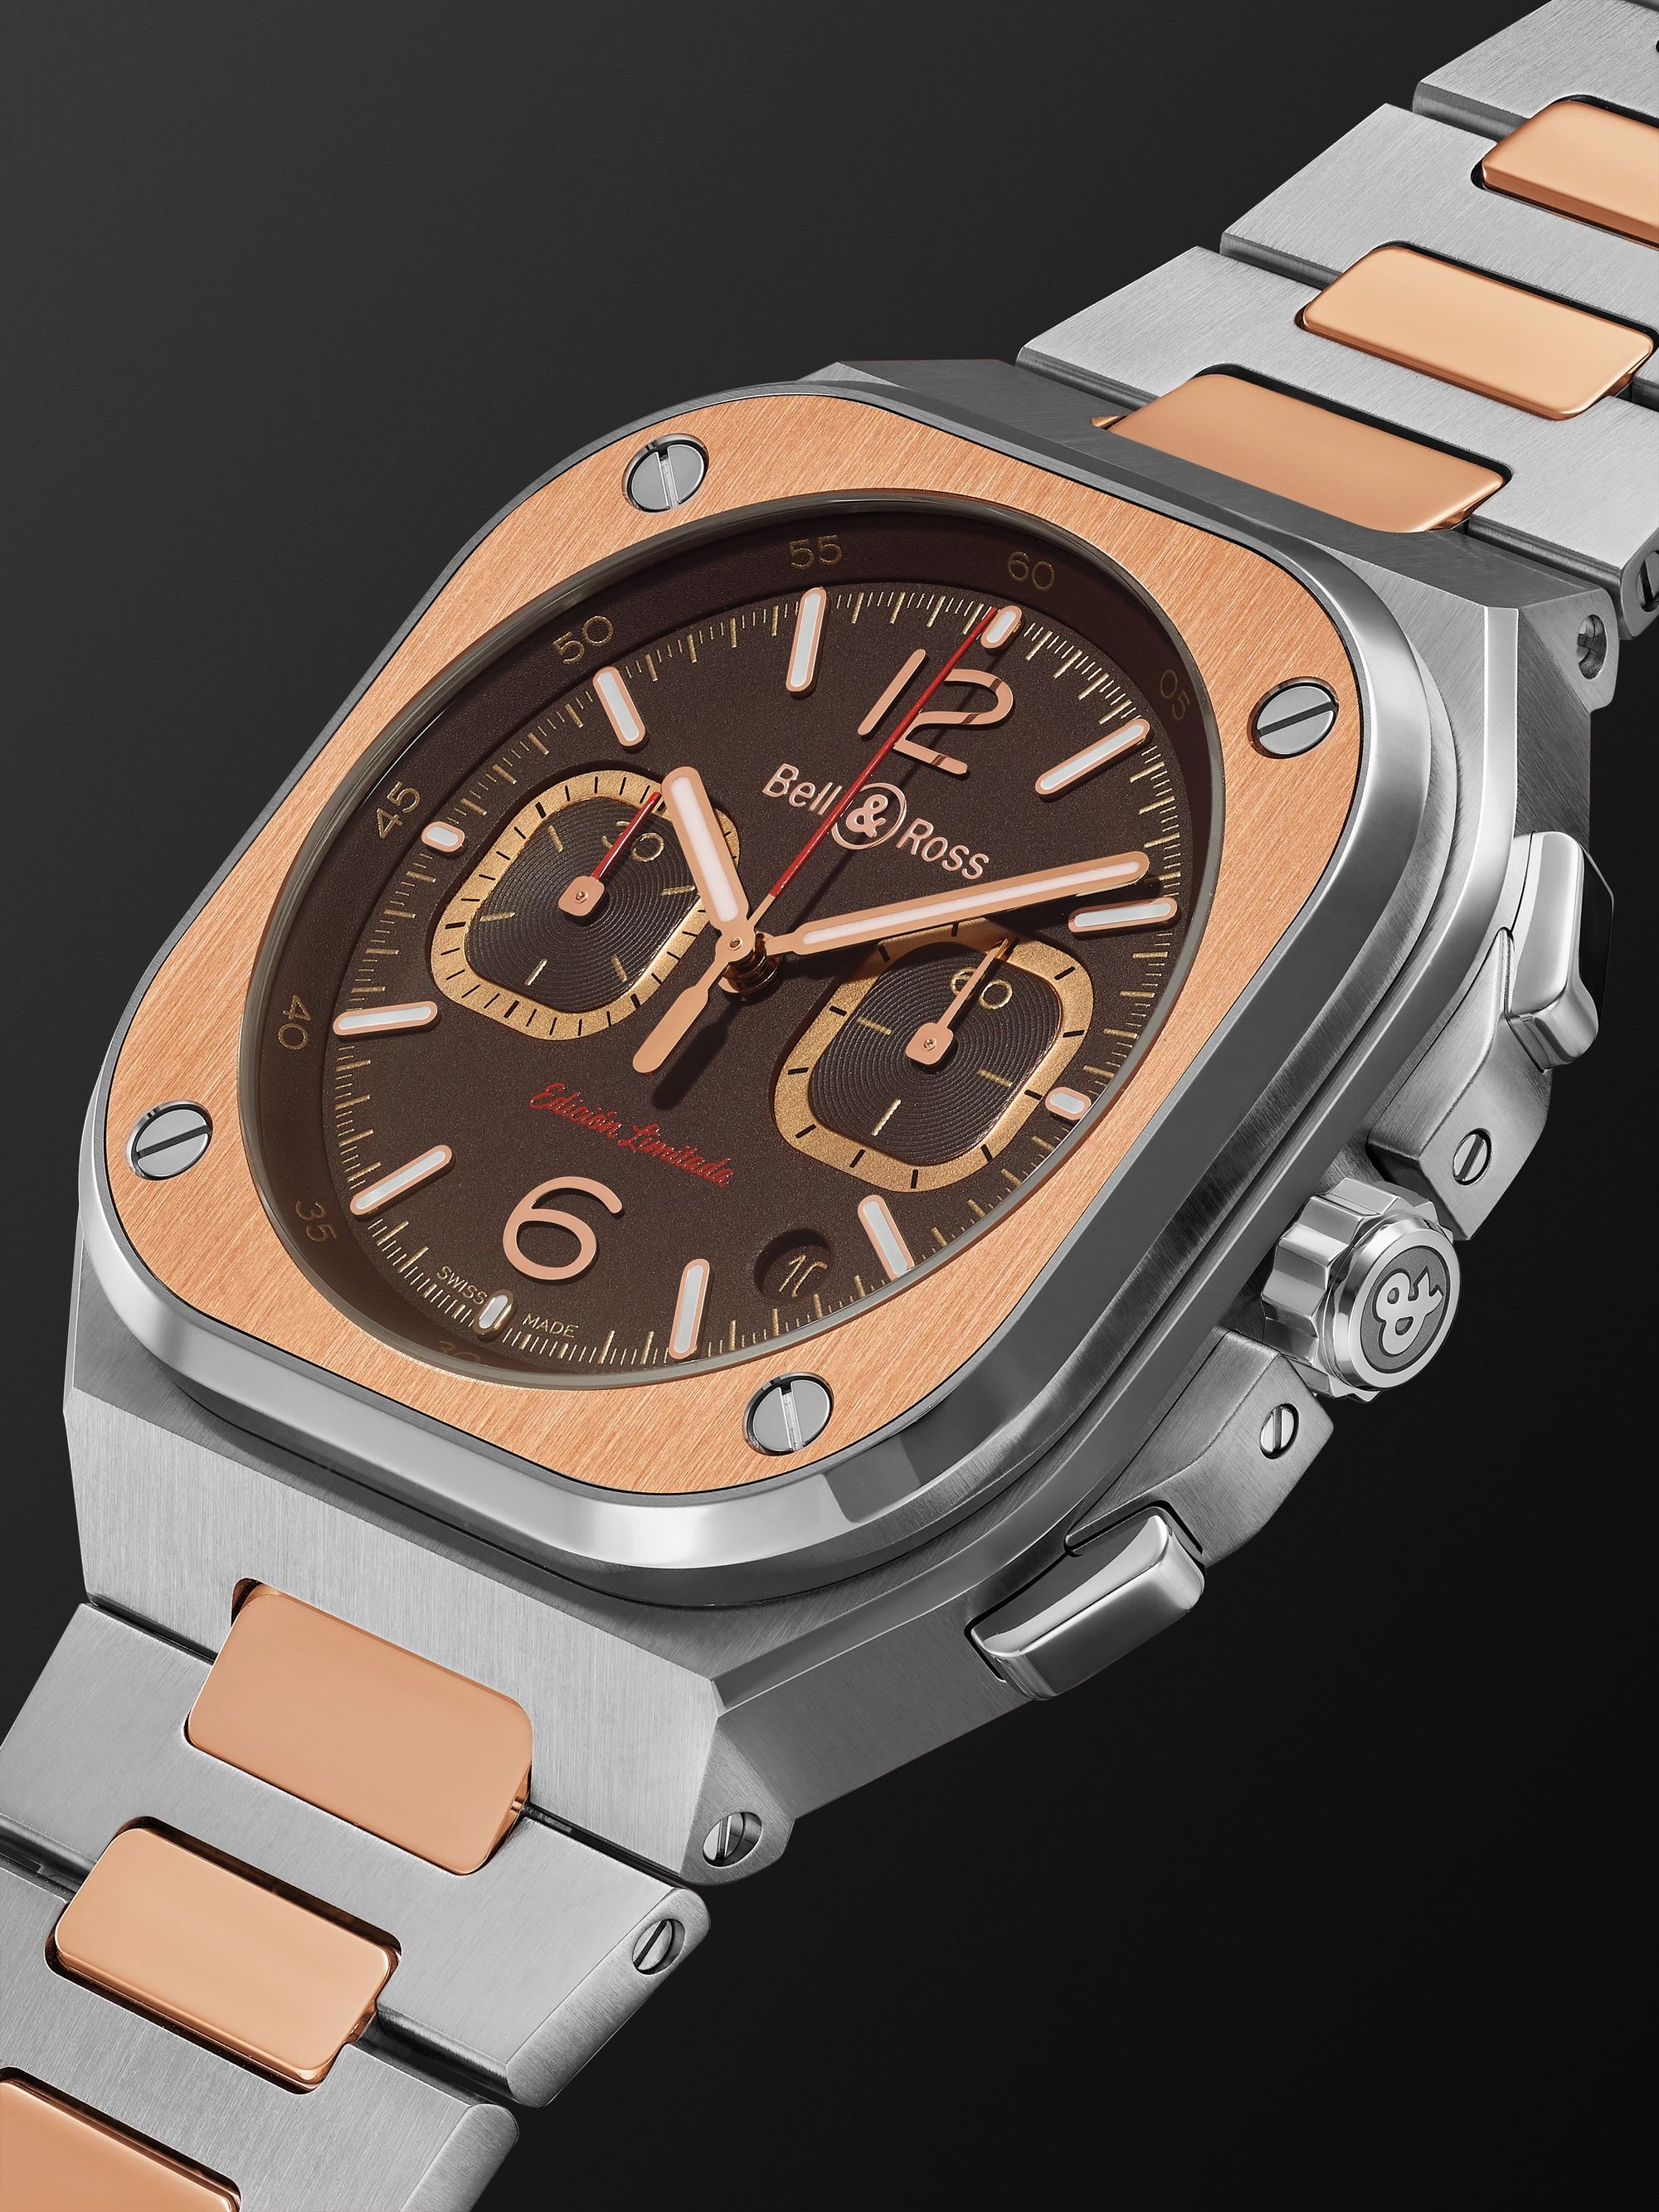 BELL & ROSS BR 05 Limited Edition Automatic Chronograph 42mm Stainless Steel and Rose Gold Watch, Ref. No. BR05C-LDA/SSG